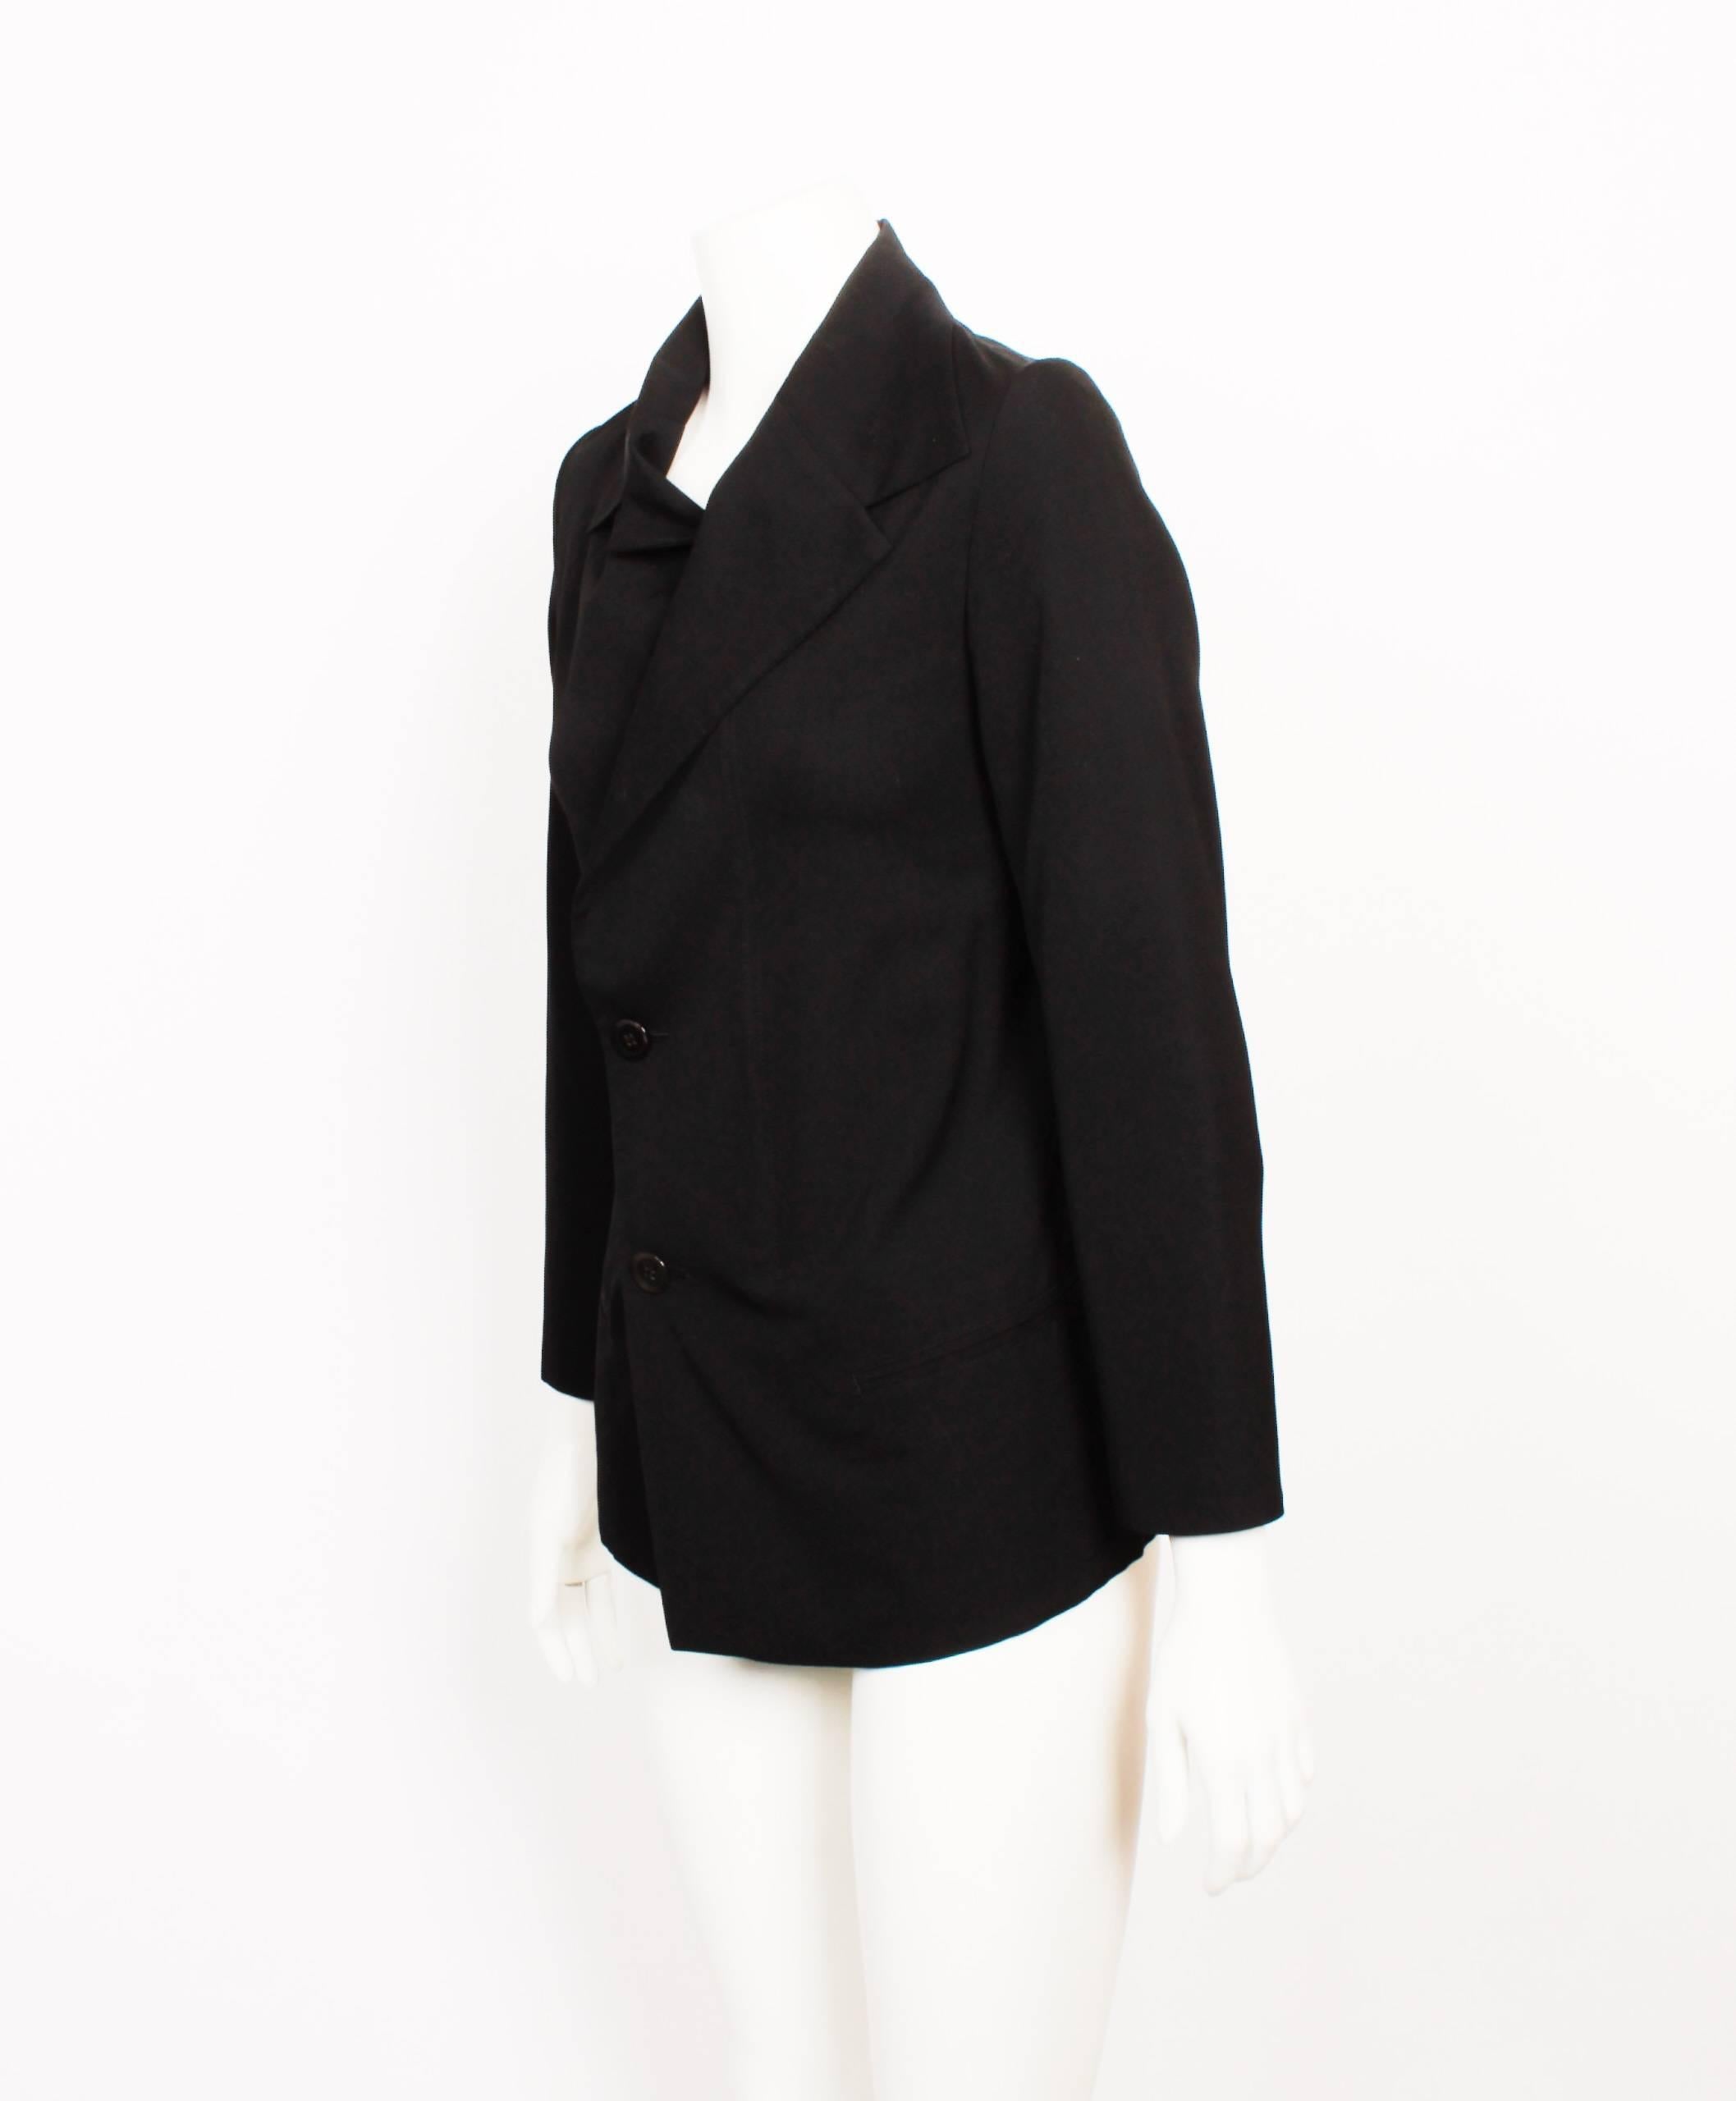 FINAL SALE

-Zip Jacket
-Two button detail

A master of draping, deconstruction and the avant-garde, the Japanese designer Yohji Yamamoto and his dark, over-sized aesthetic occupy a unique position in fashion. The hugely influential outsider has